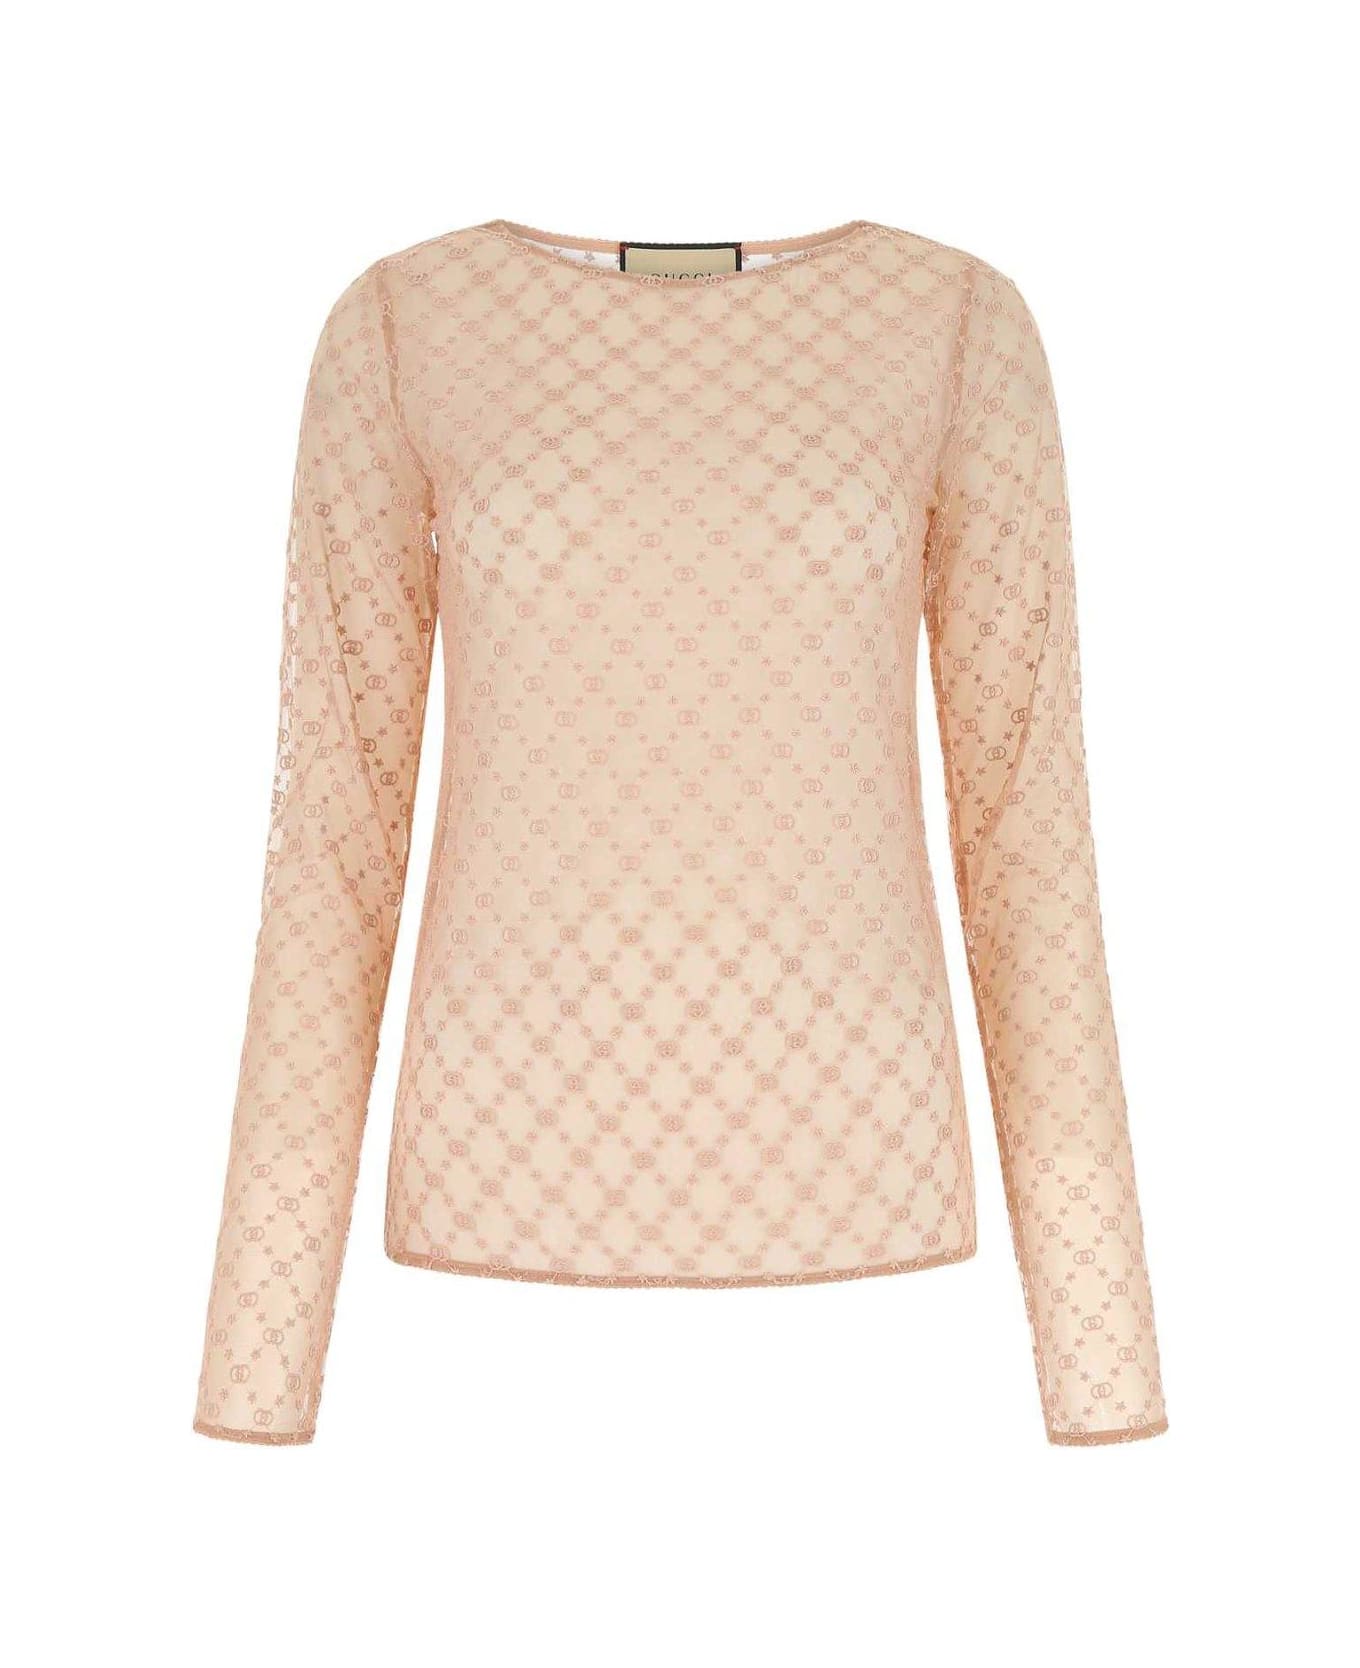 Gucci Embroidered Mesh Top - Rosa